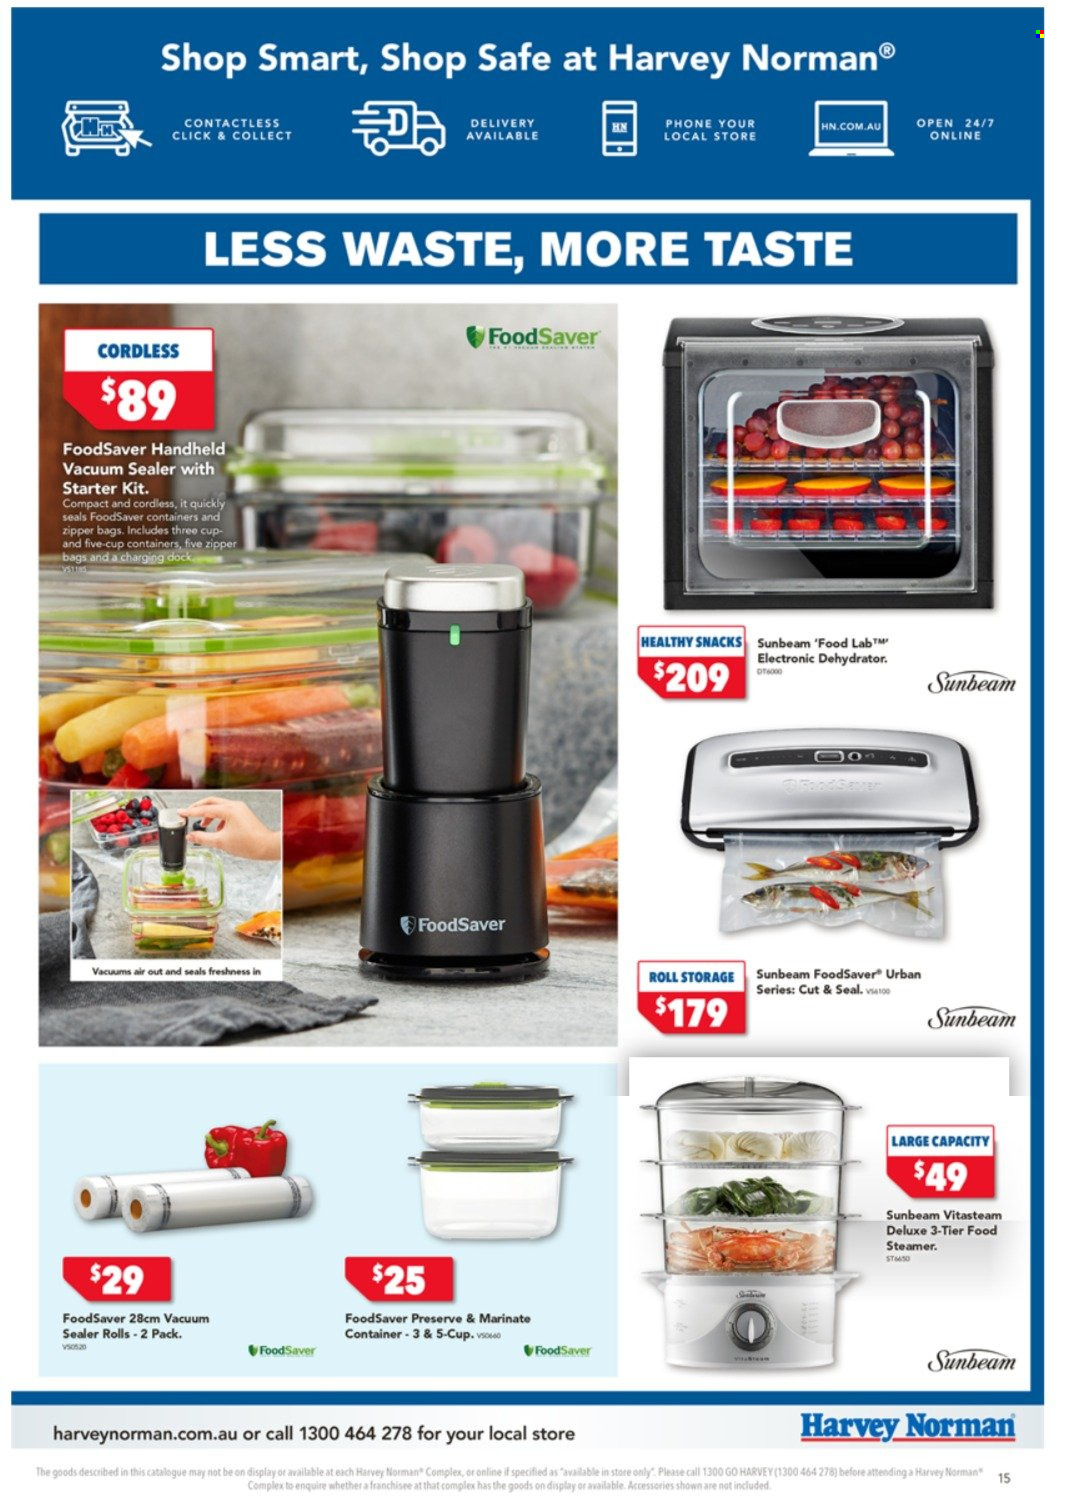 thumbnail - Harvey Norman Catalogue - 25 Oct 2021 - 7 Nov 2021 - Sales products - container, vacuum sealer, cup, Sunbeam, phone, handheld vacuum cleaner, dehydrator, food steamer. Page 15.